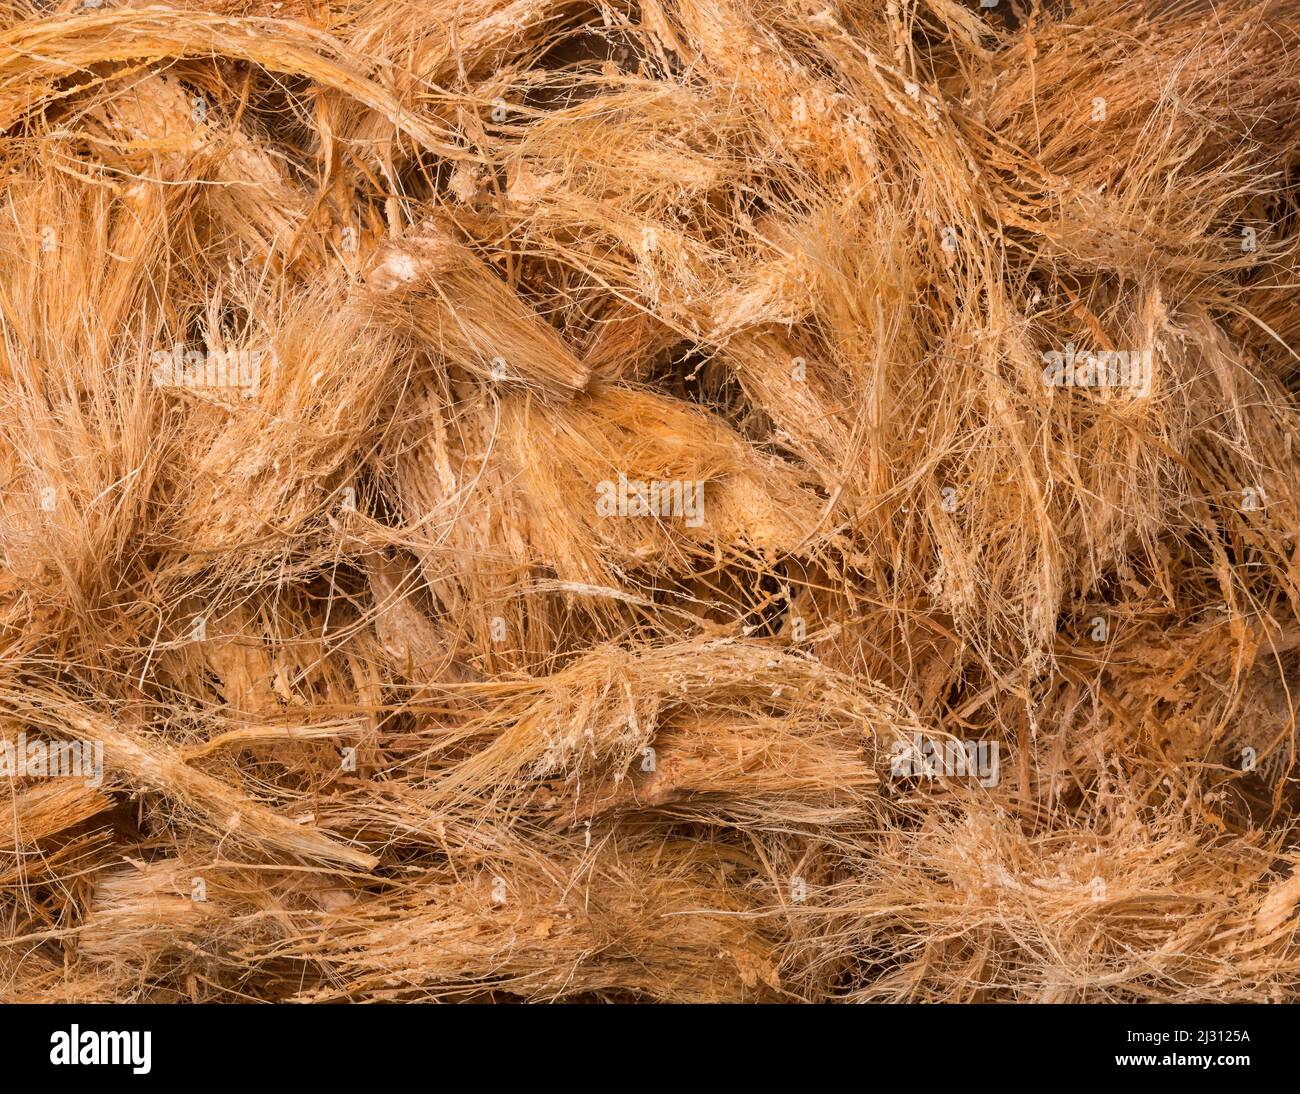 coconut husk fiber or coir, commercially important natural fiber extracted from outer husk of coconut fruit, taken from above, background texture Stock Photo